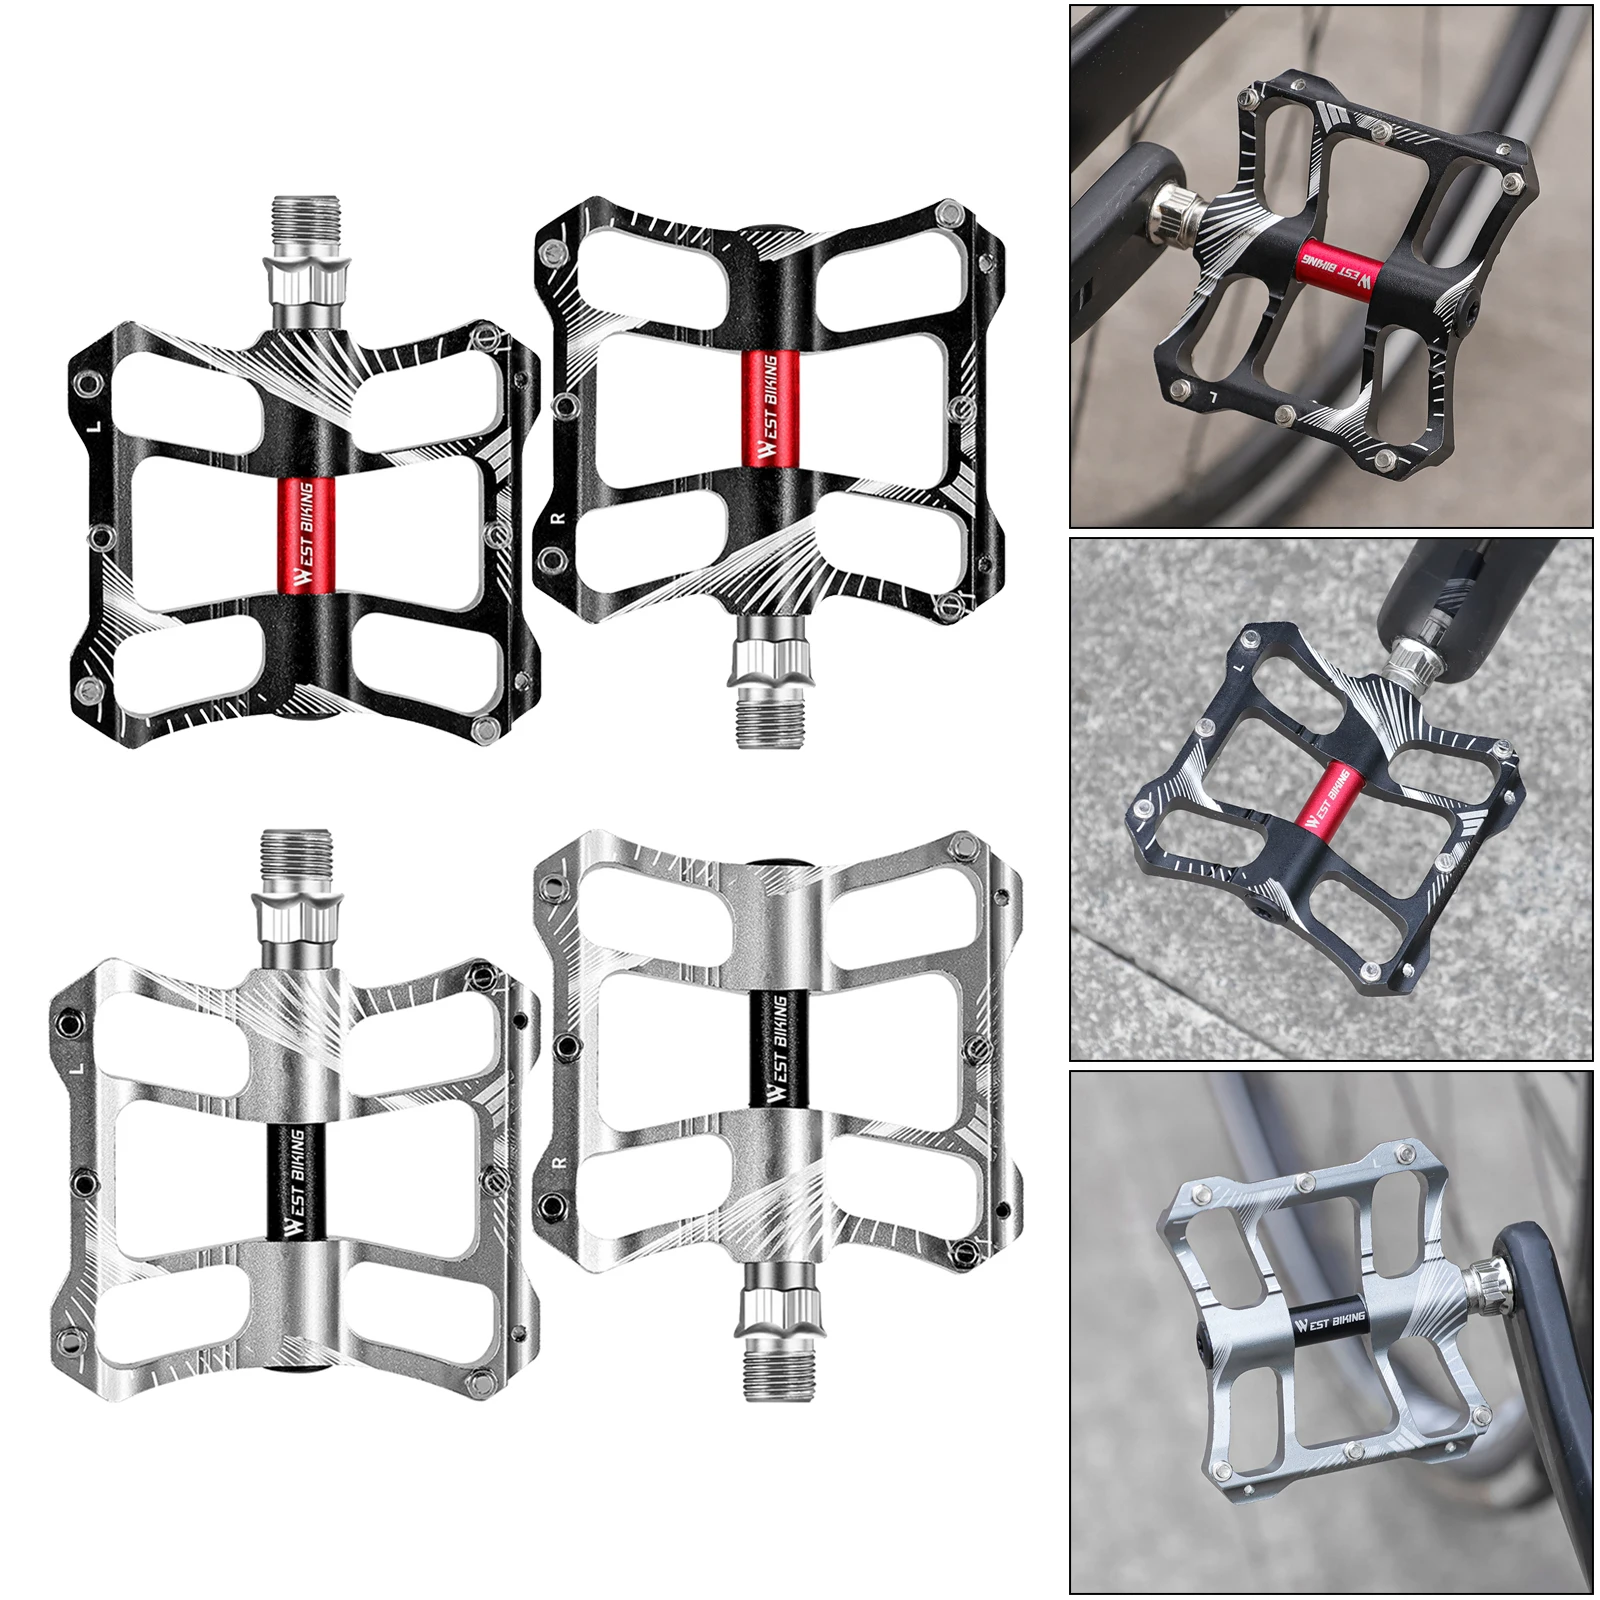 CNC Aluminum Alloy Anti-Slip Flat Bike Pedals 9/16`` Universal Cycle, Abrasion Resistance, Anodized Surface, Reduces Scratches